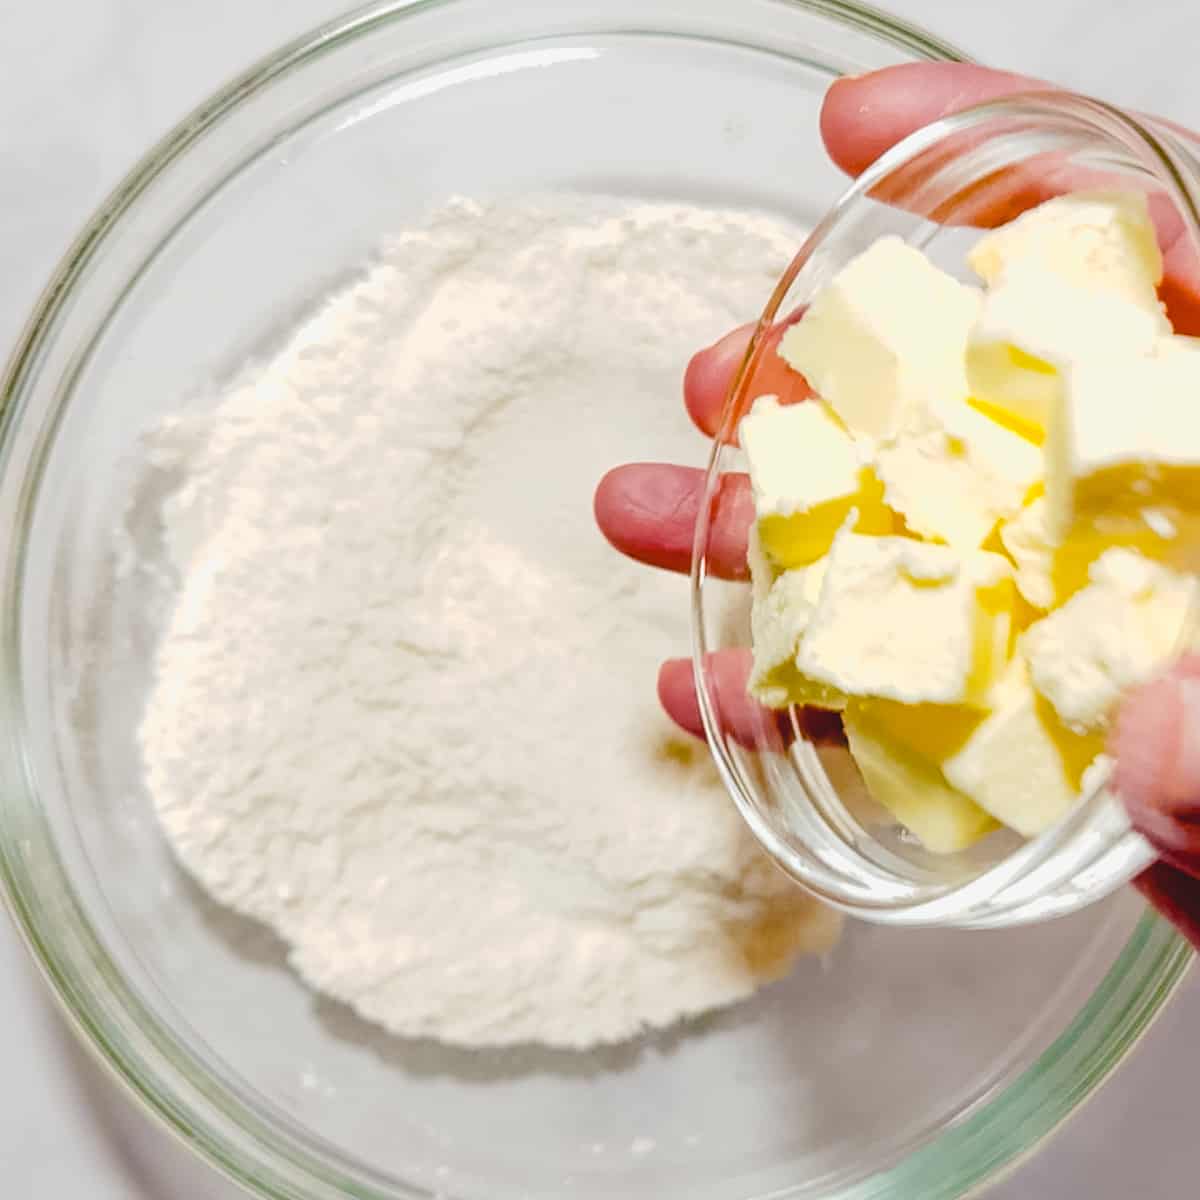 adding butter to dry ingredients for biscuits.